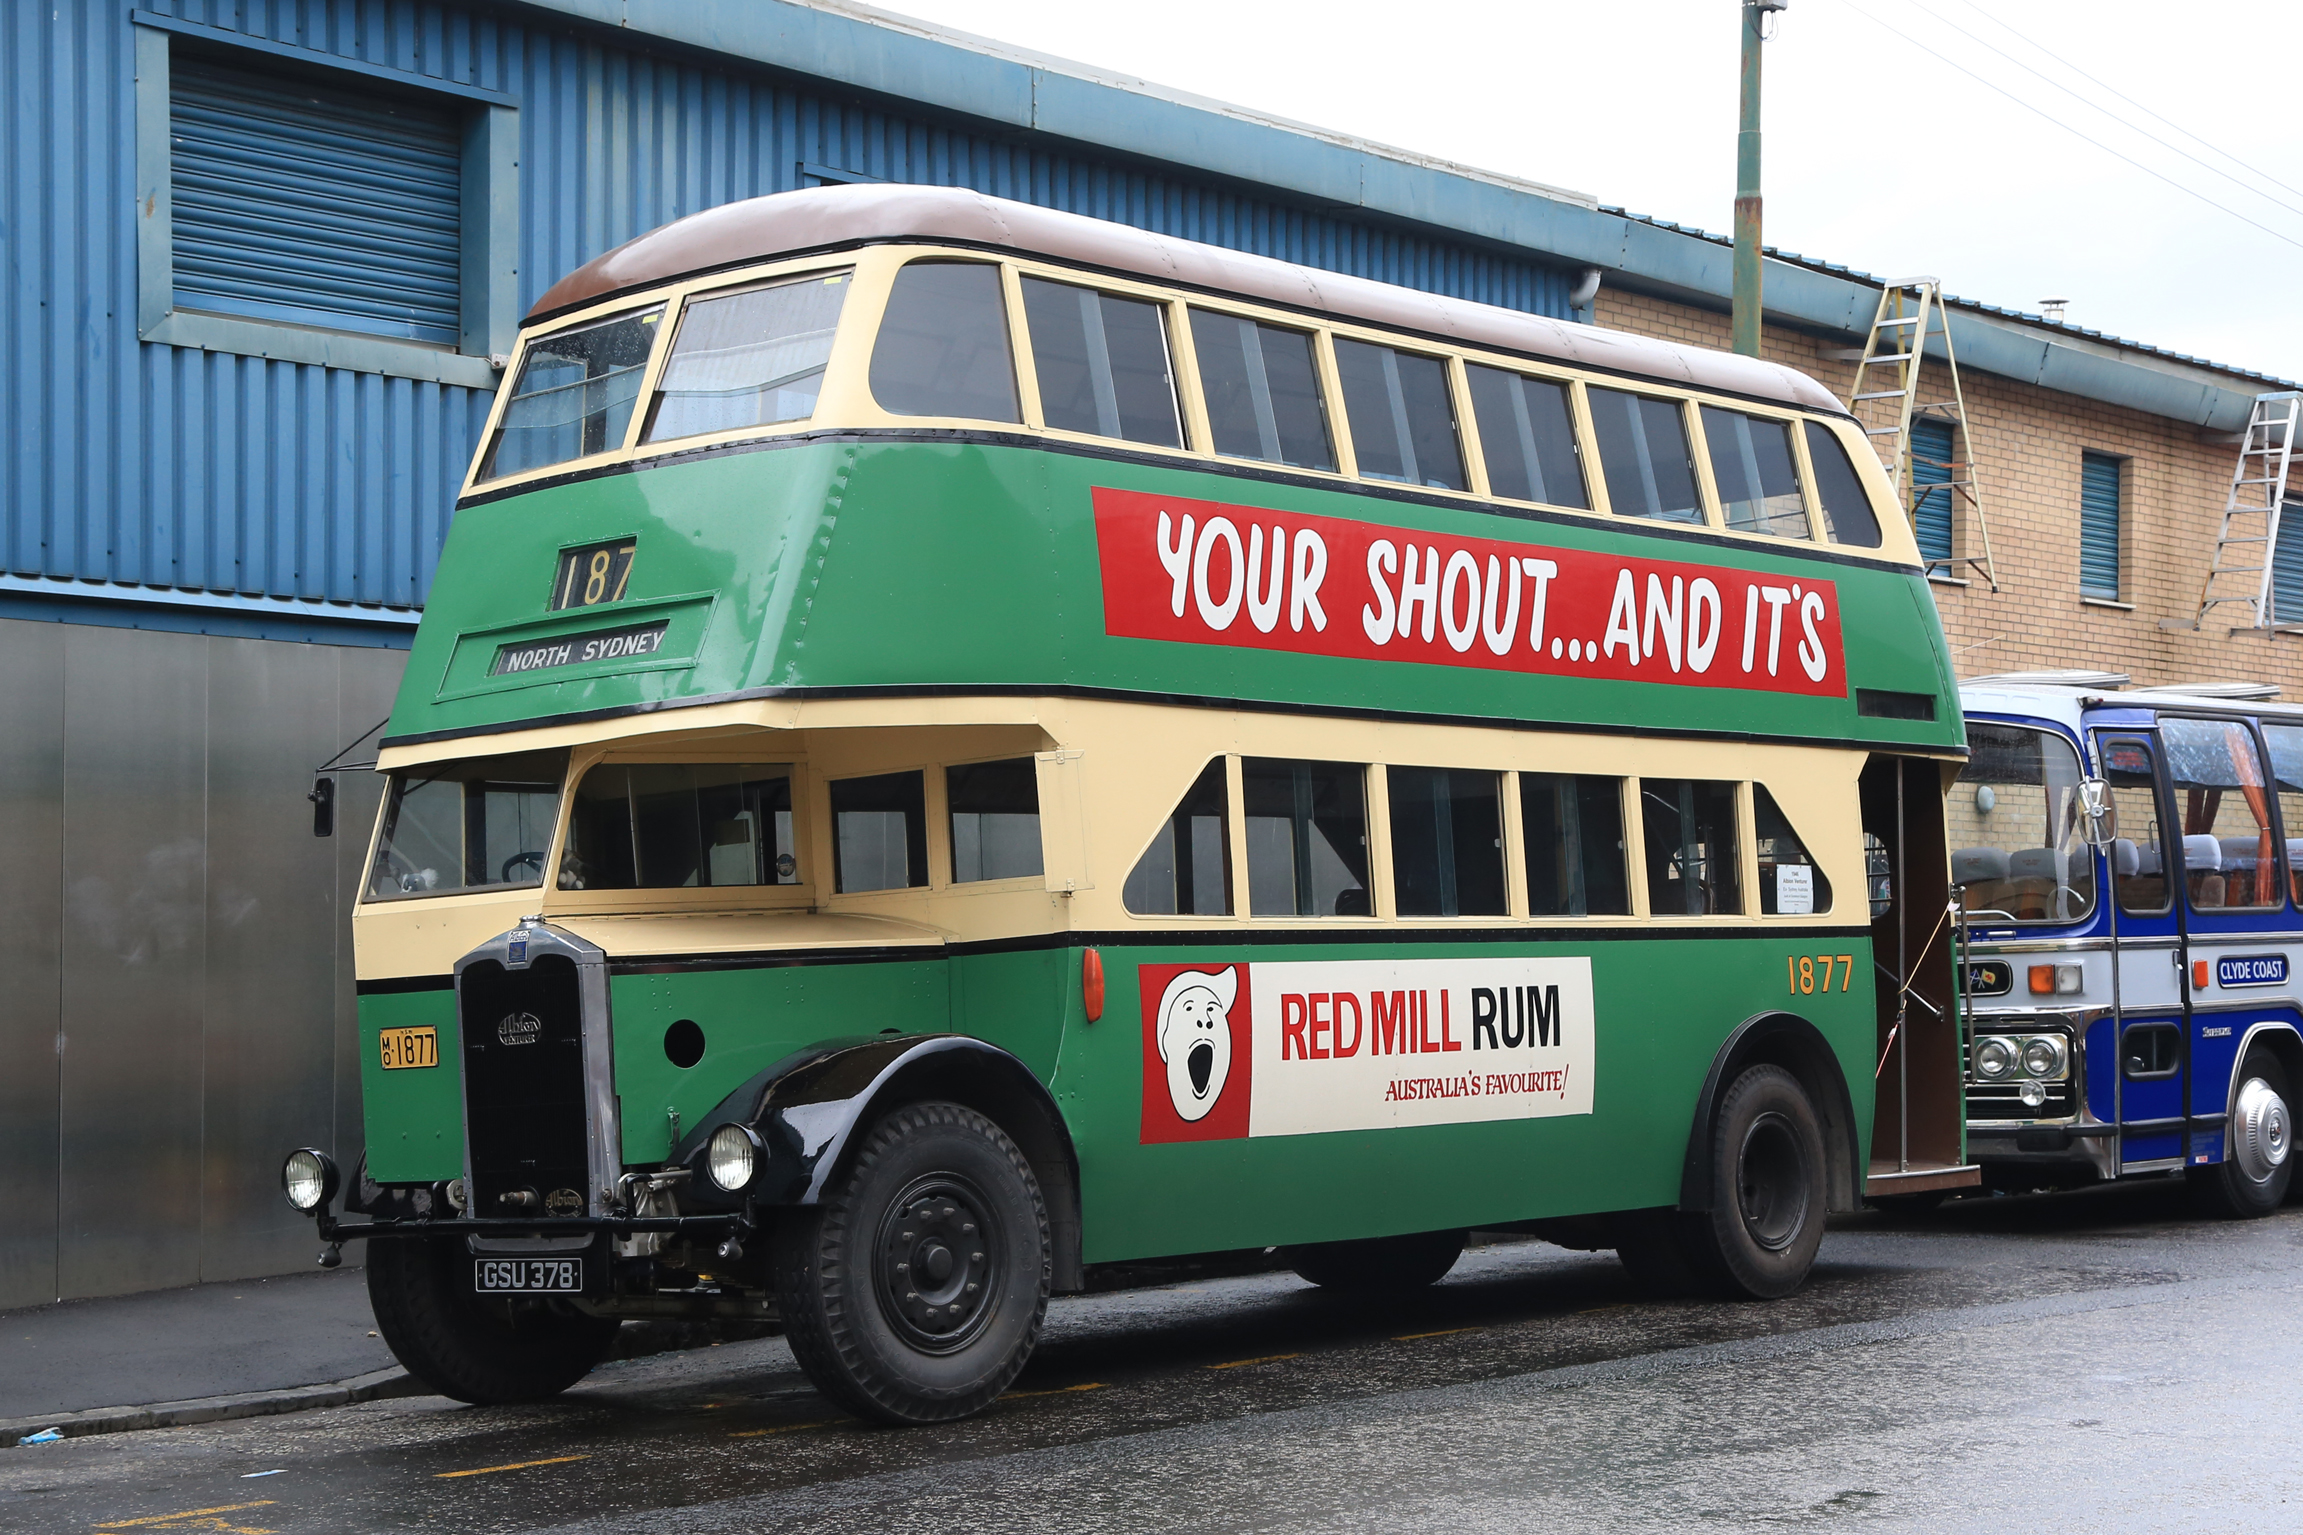 With a chassis built by Albion in Glasgow, this repatriated 1947 Commonwealth Engineering bodied Sydney double-decker is typical of Australian buses of that era. The body shaping makes for some cramped seating on the upper deck